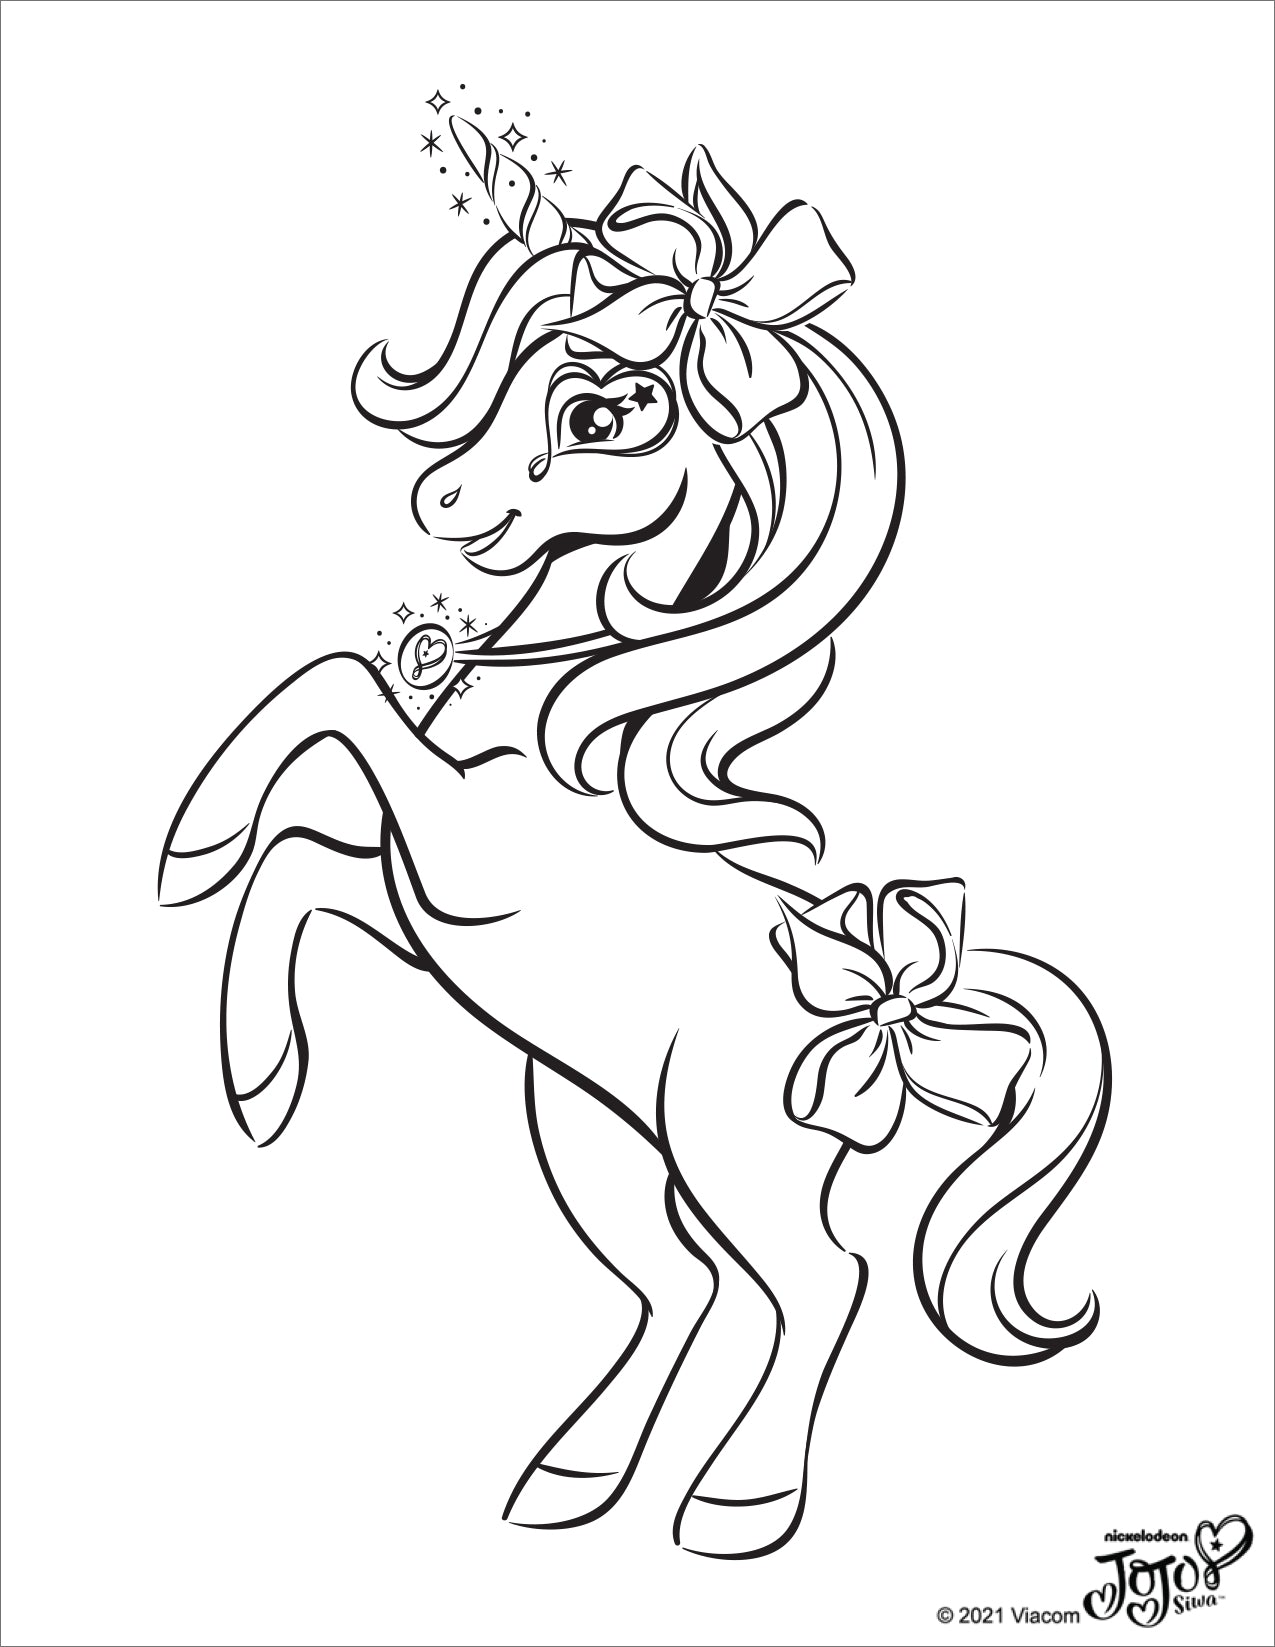 CultureFly | JoJo Siwa Coloring Pages